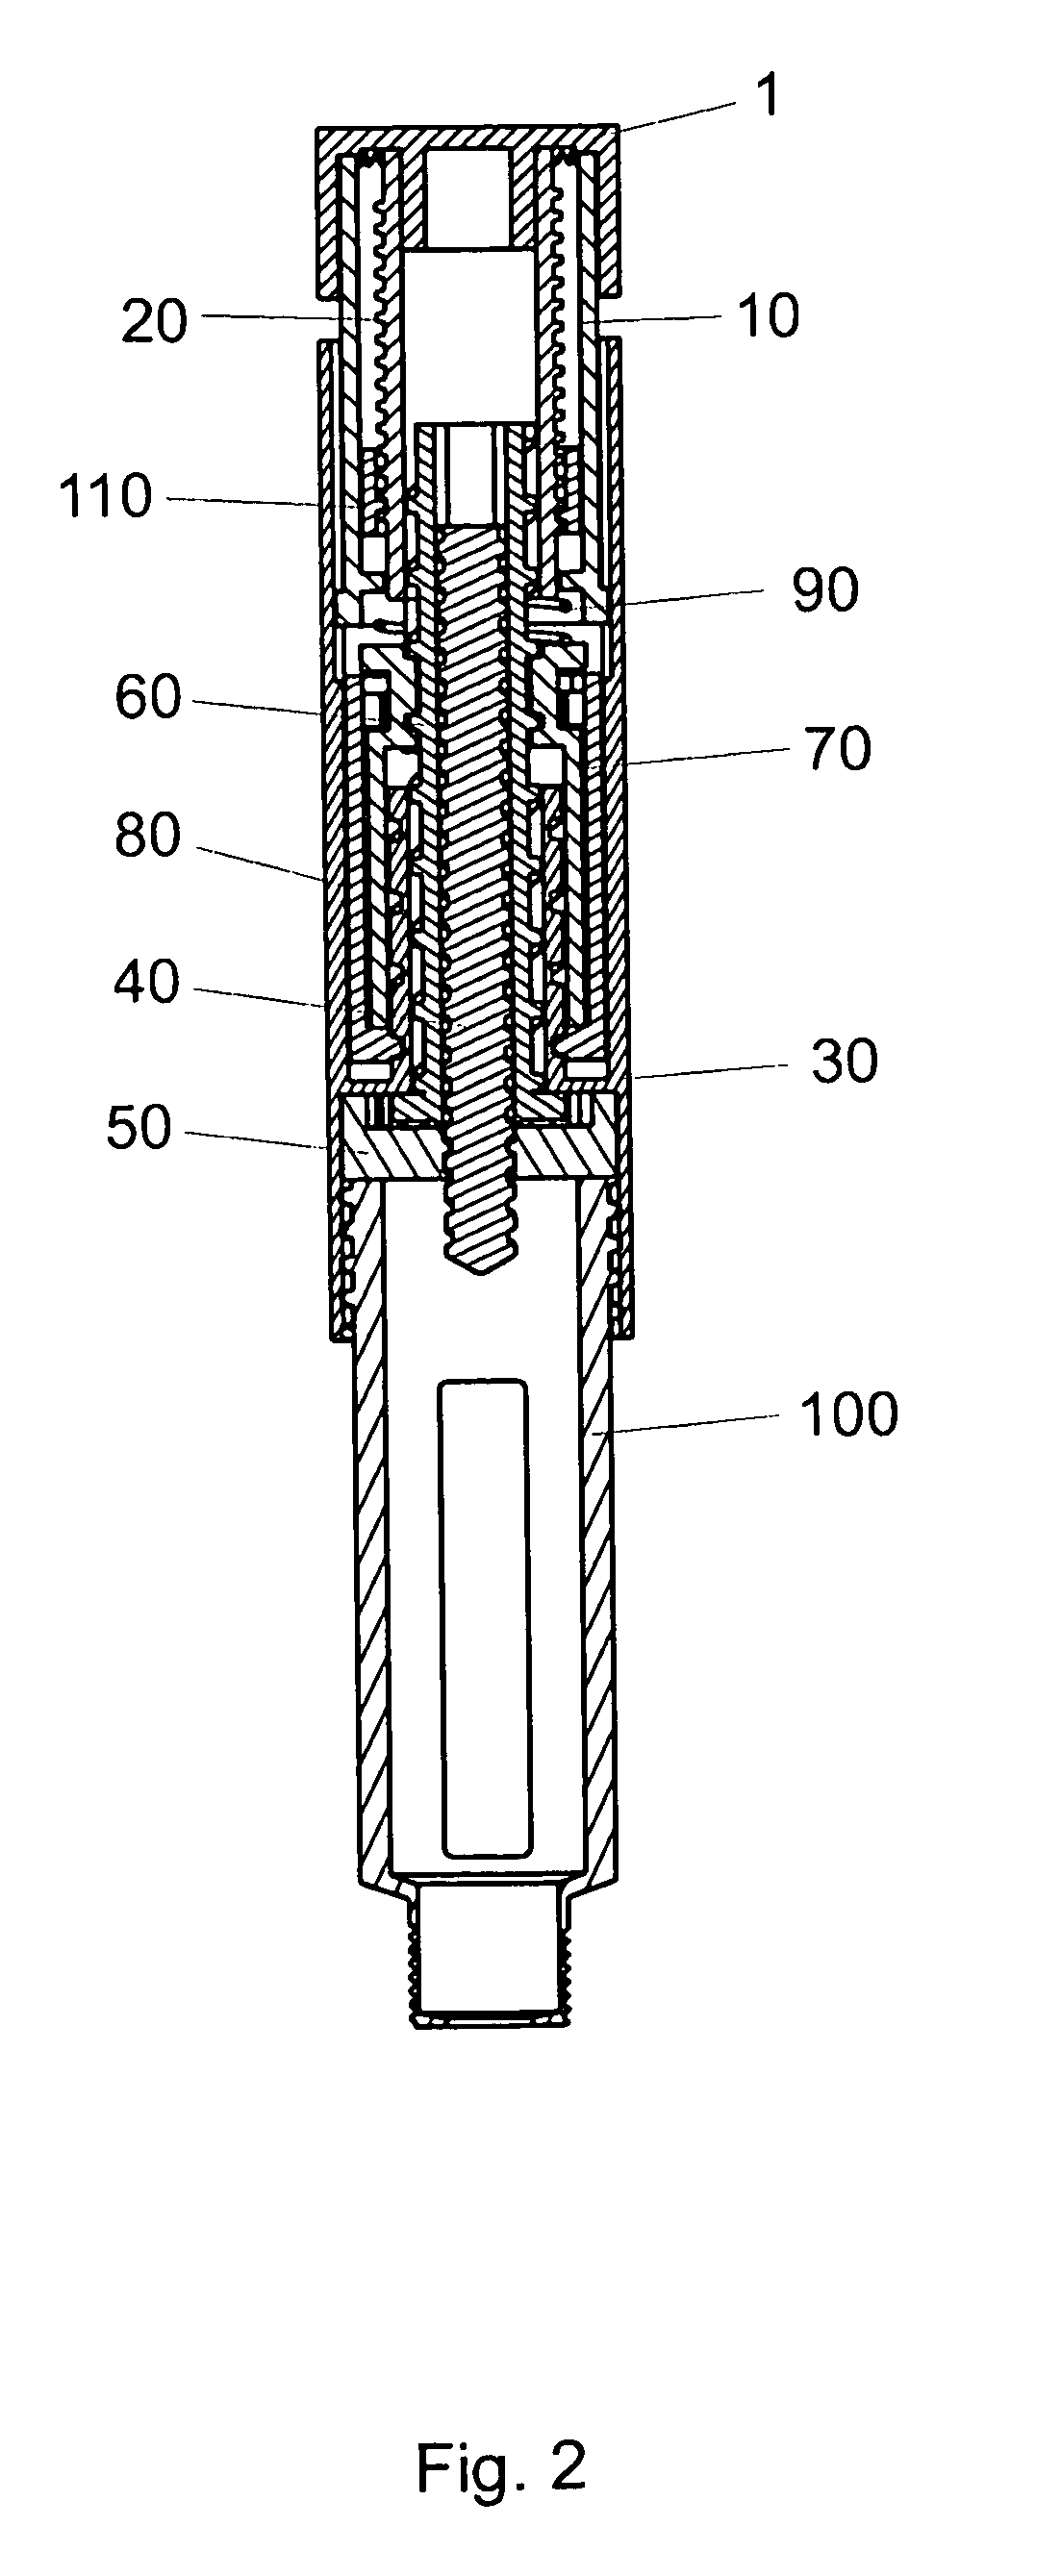 Injection device for apportioning set doses